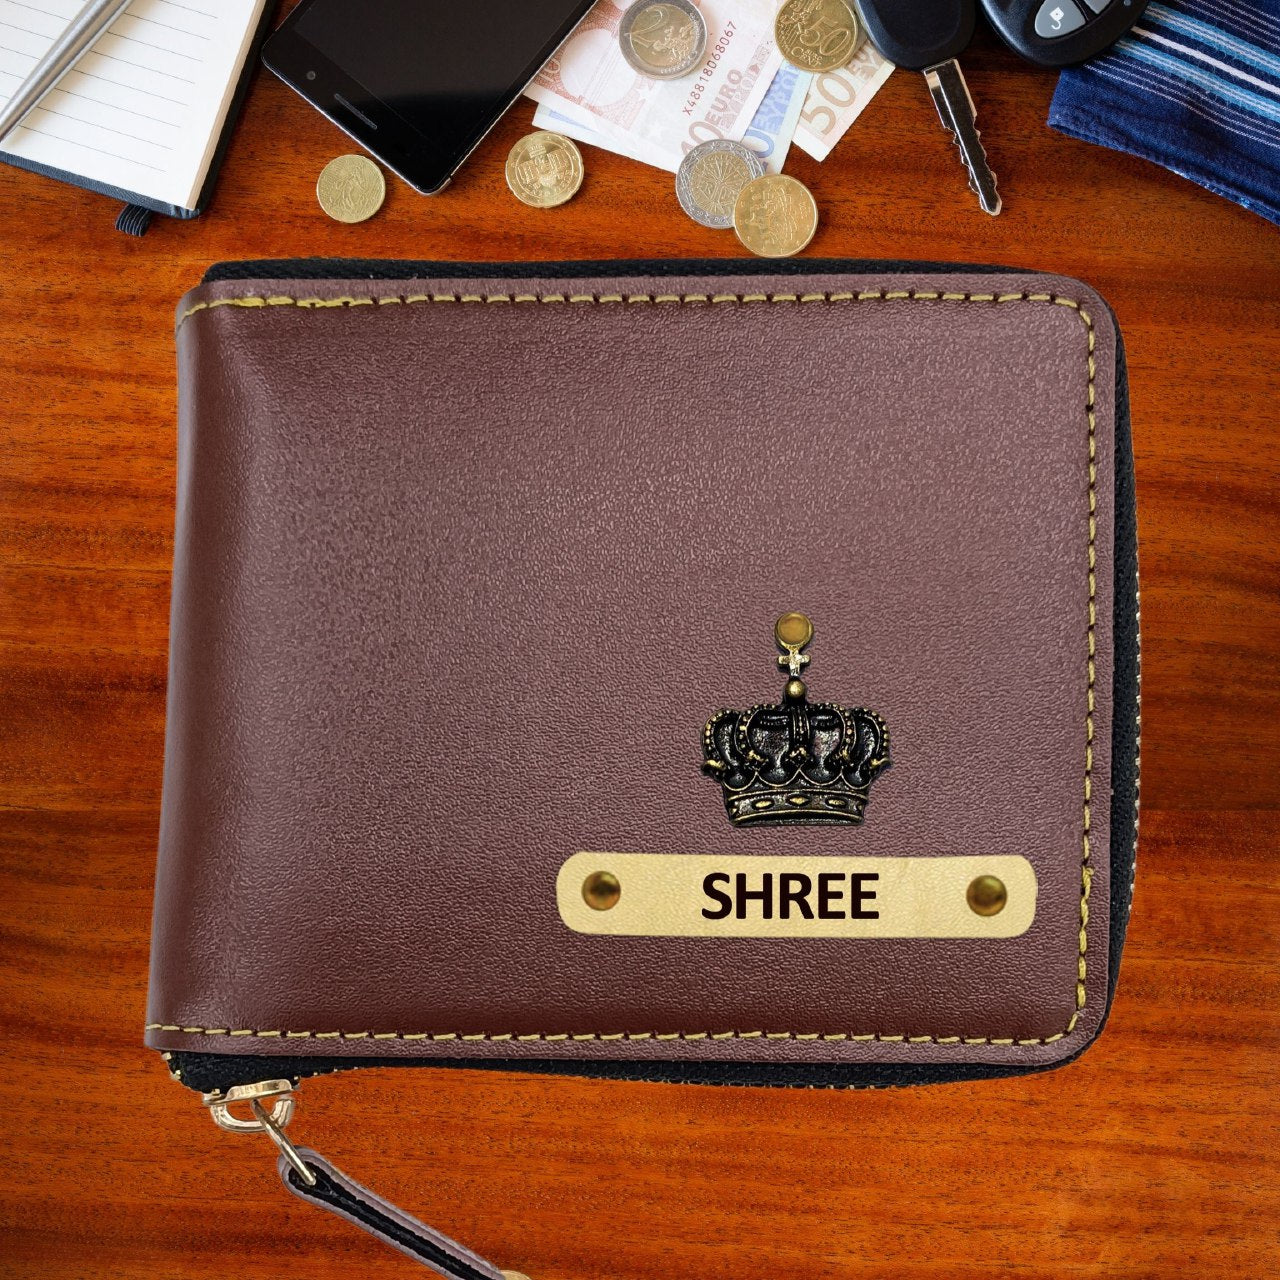 LEATHER MONEY CARRYING BAG (BROWN) 13446 – Sreeleathers Ltd